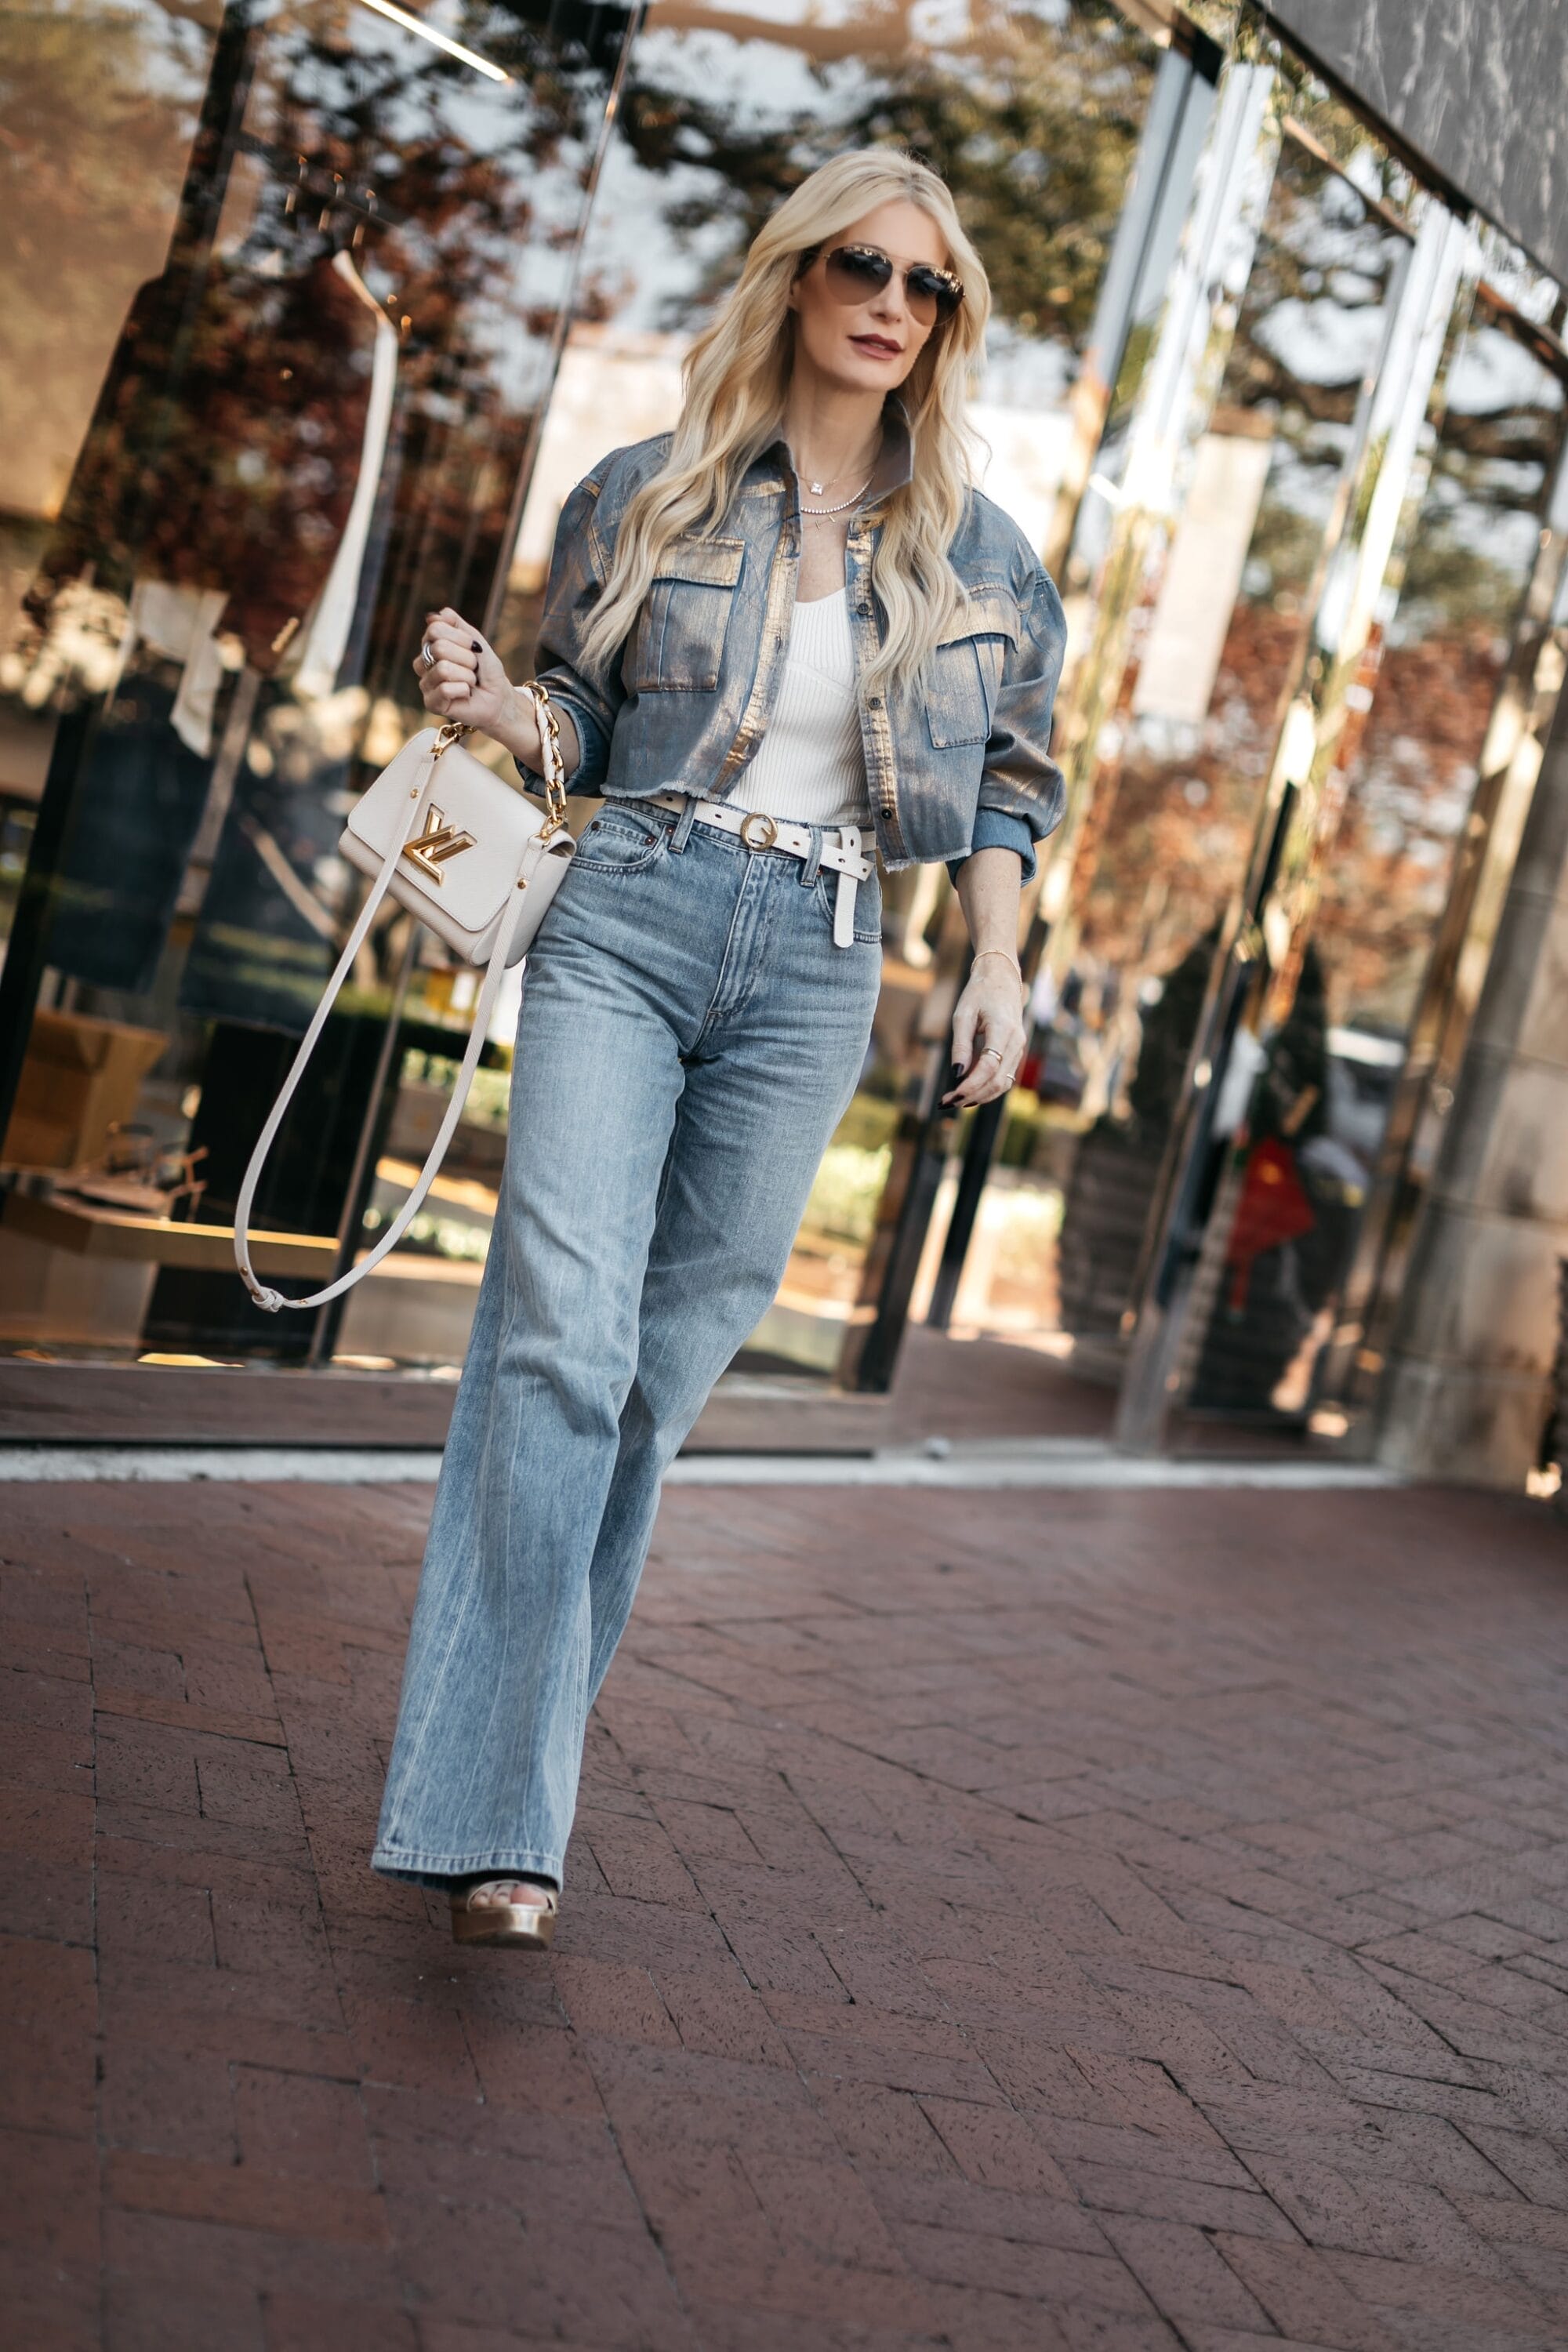 How to Wear & Style Wide Leg Jeans